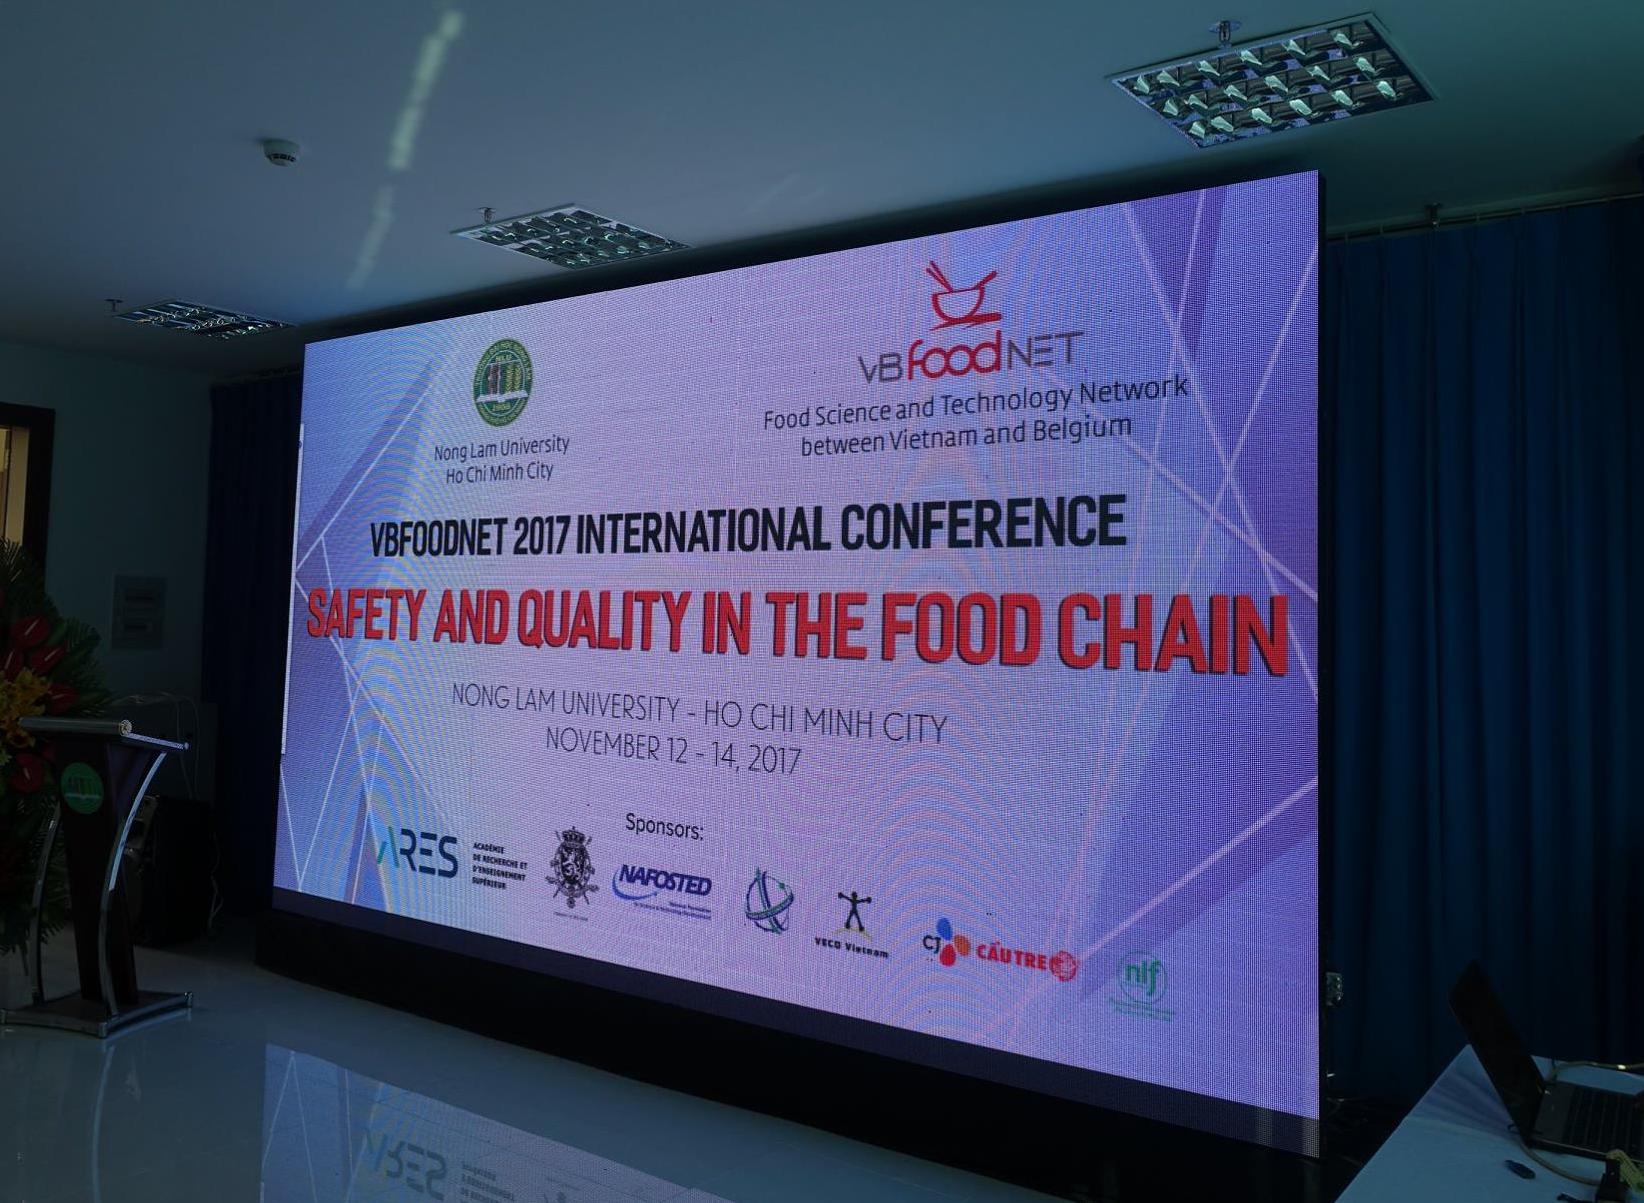 The 5th Conference of the Food Science and Technology Network between Vietnam and Belgium (VBFoodNET) took place on 13 and 14 November at Nong Lam University in Ho Chi Minh City (Photo: Rikolto)